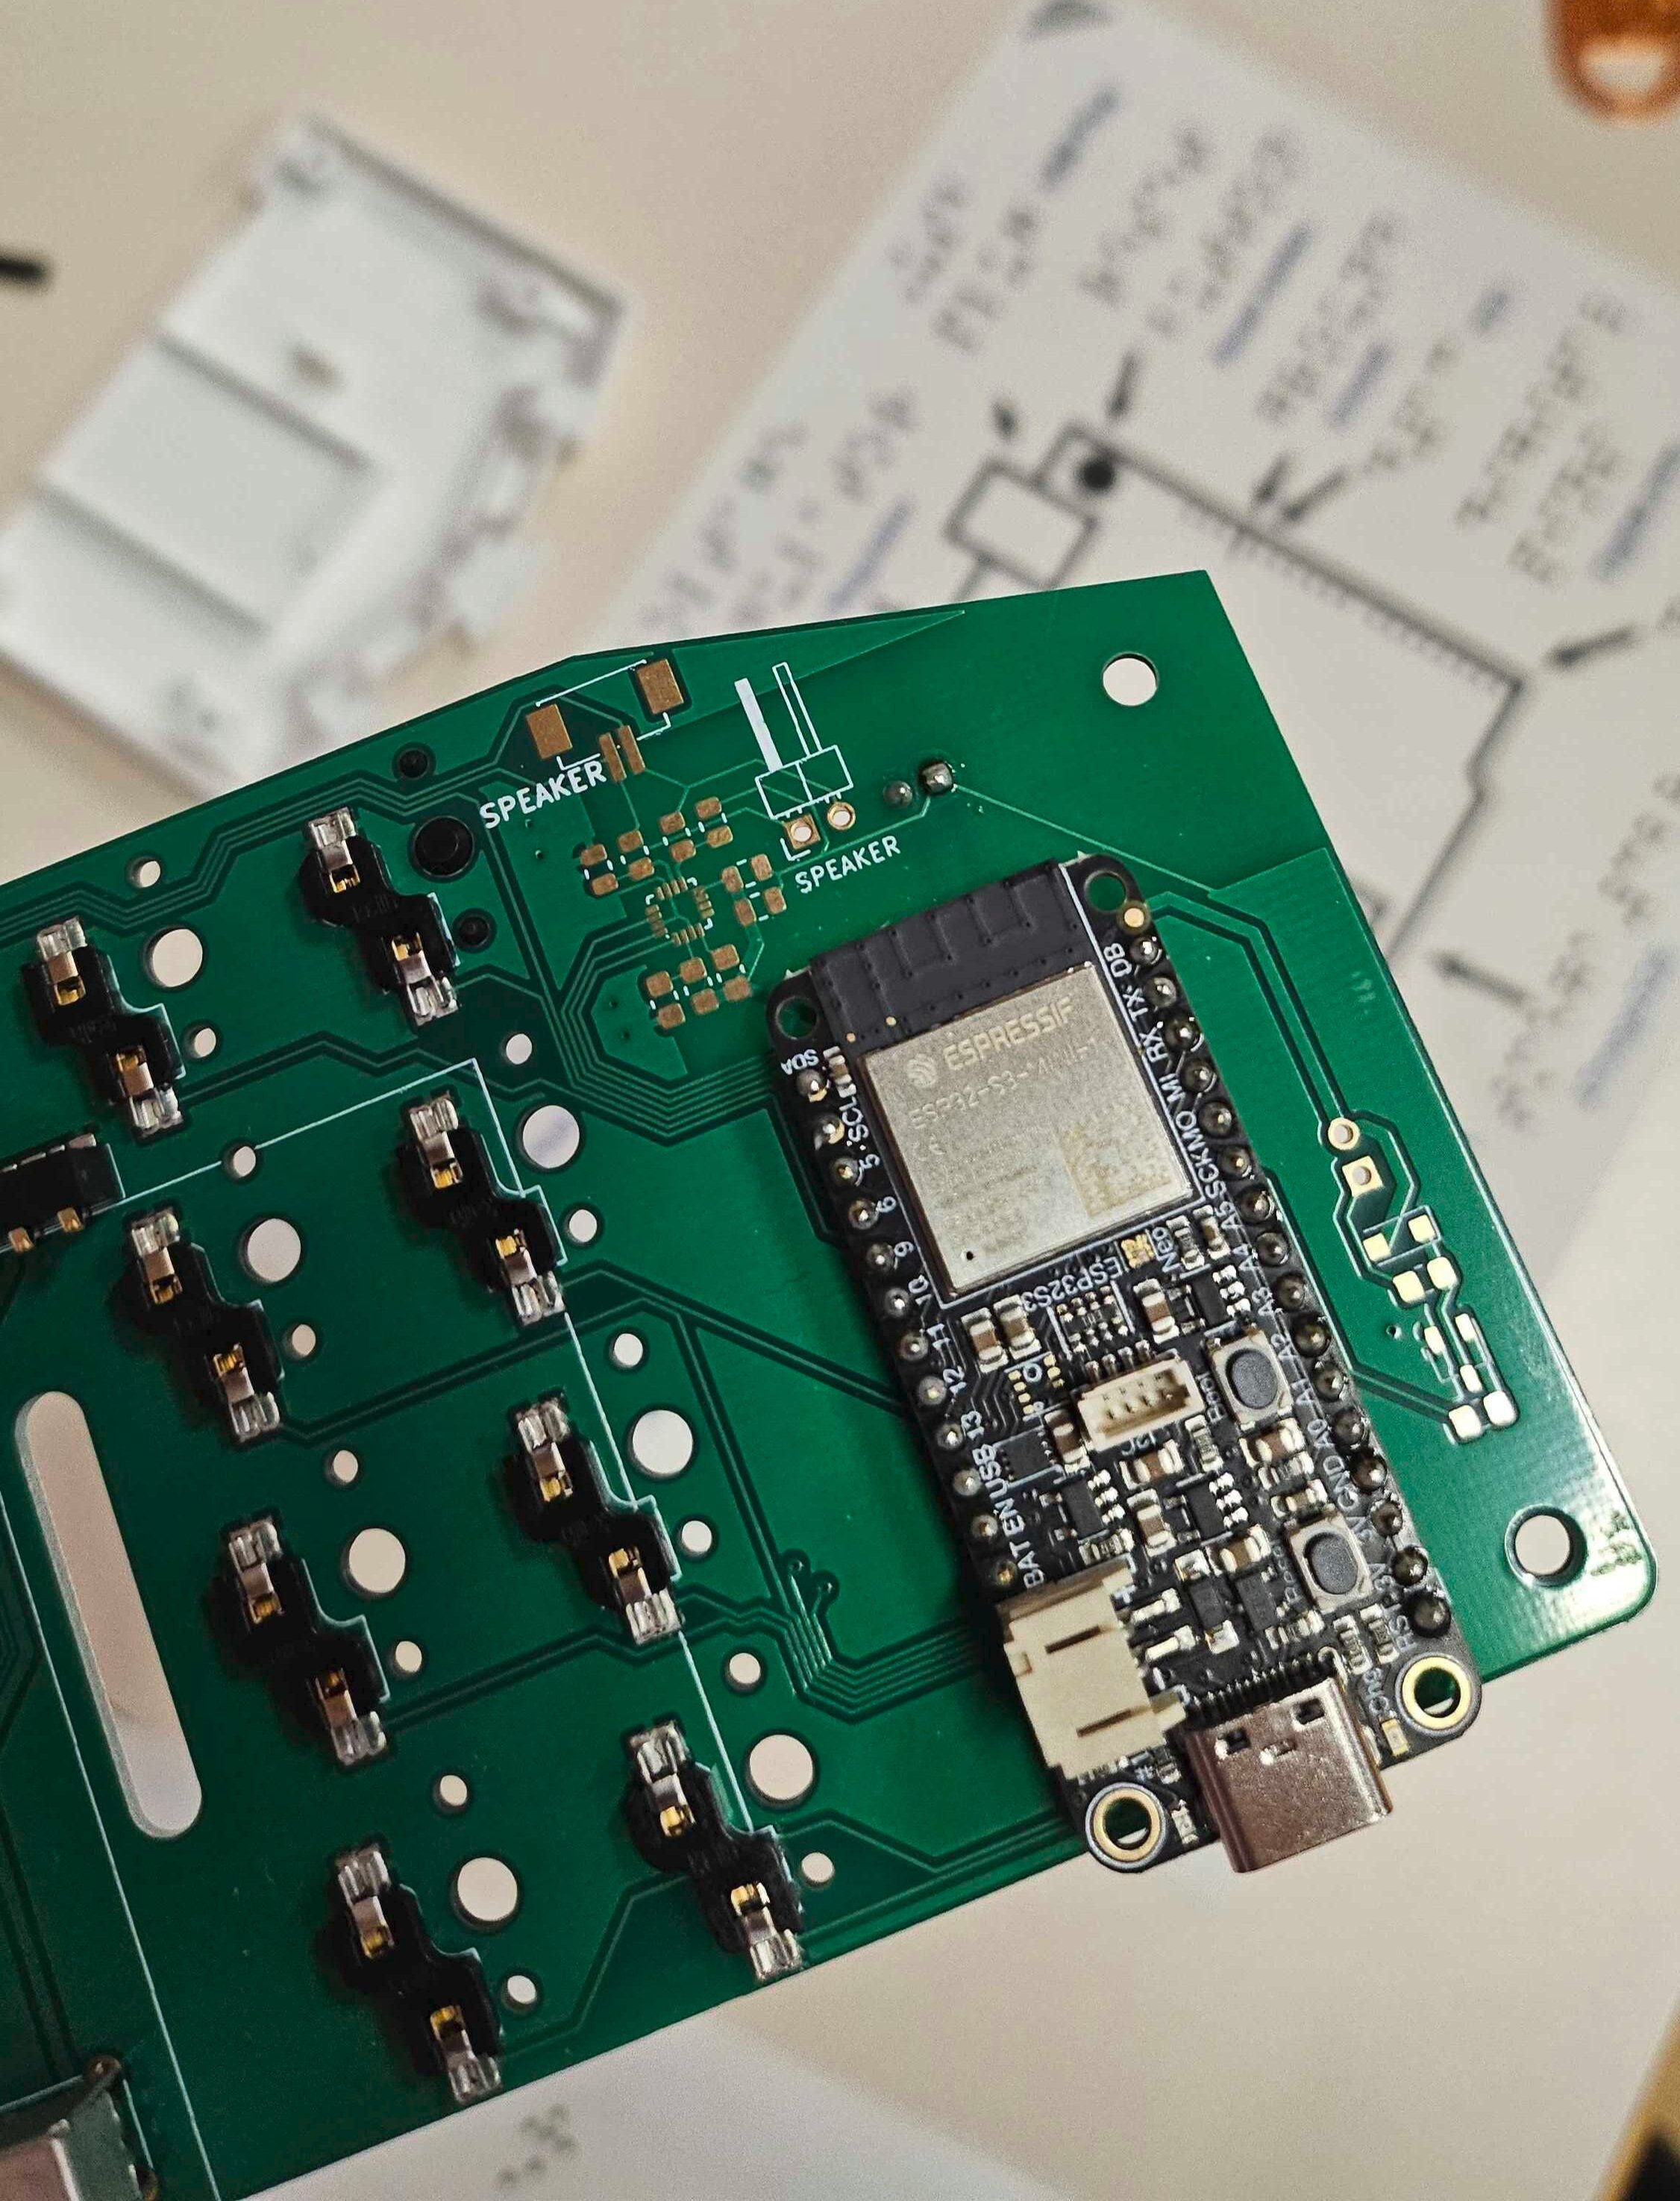 A green circuit board with an ESP32S3 processor on it. This processor is what translates the braille to latin alphabet before transmitting it to the device the keyboard is paired with.